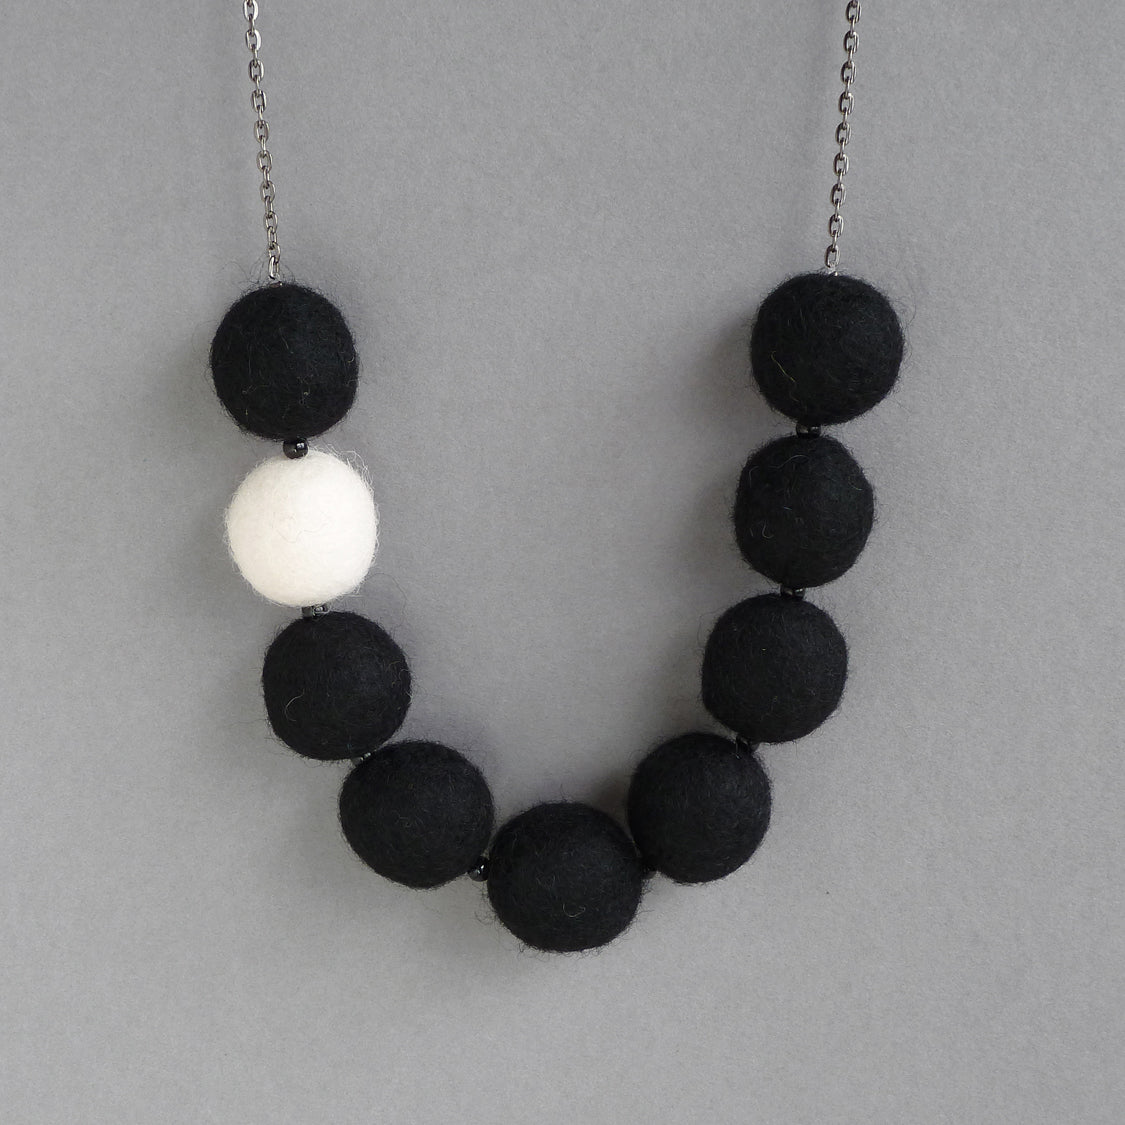 Chunky black and white necklace